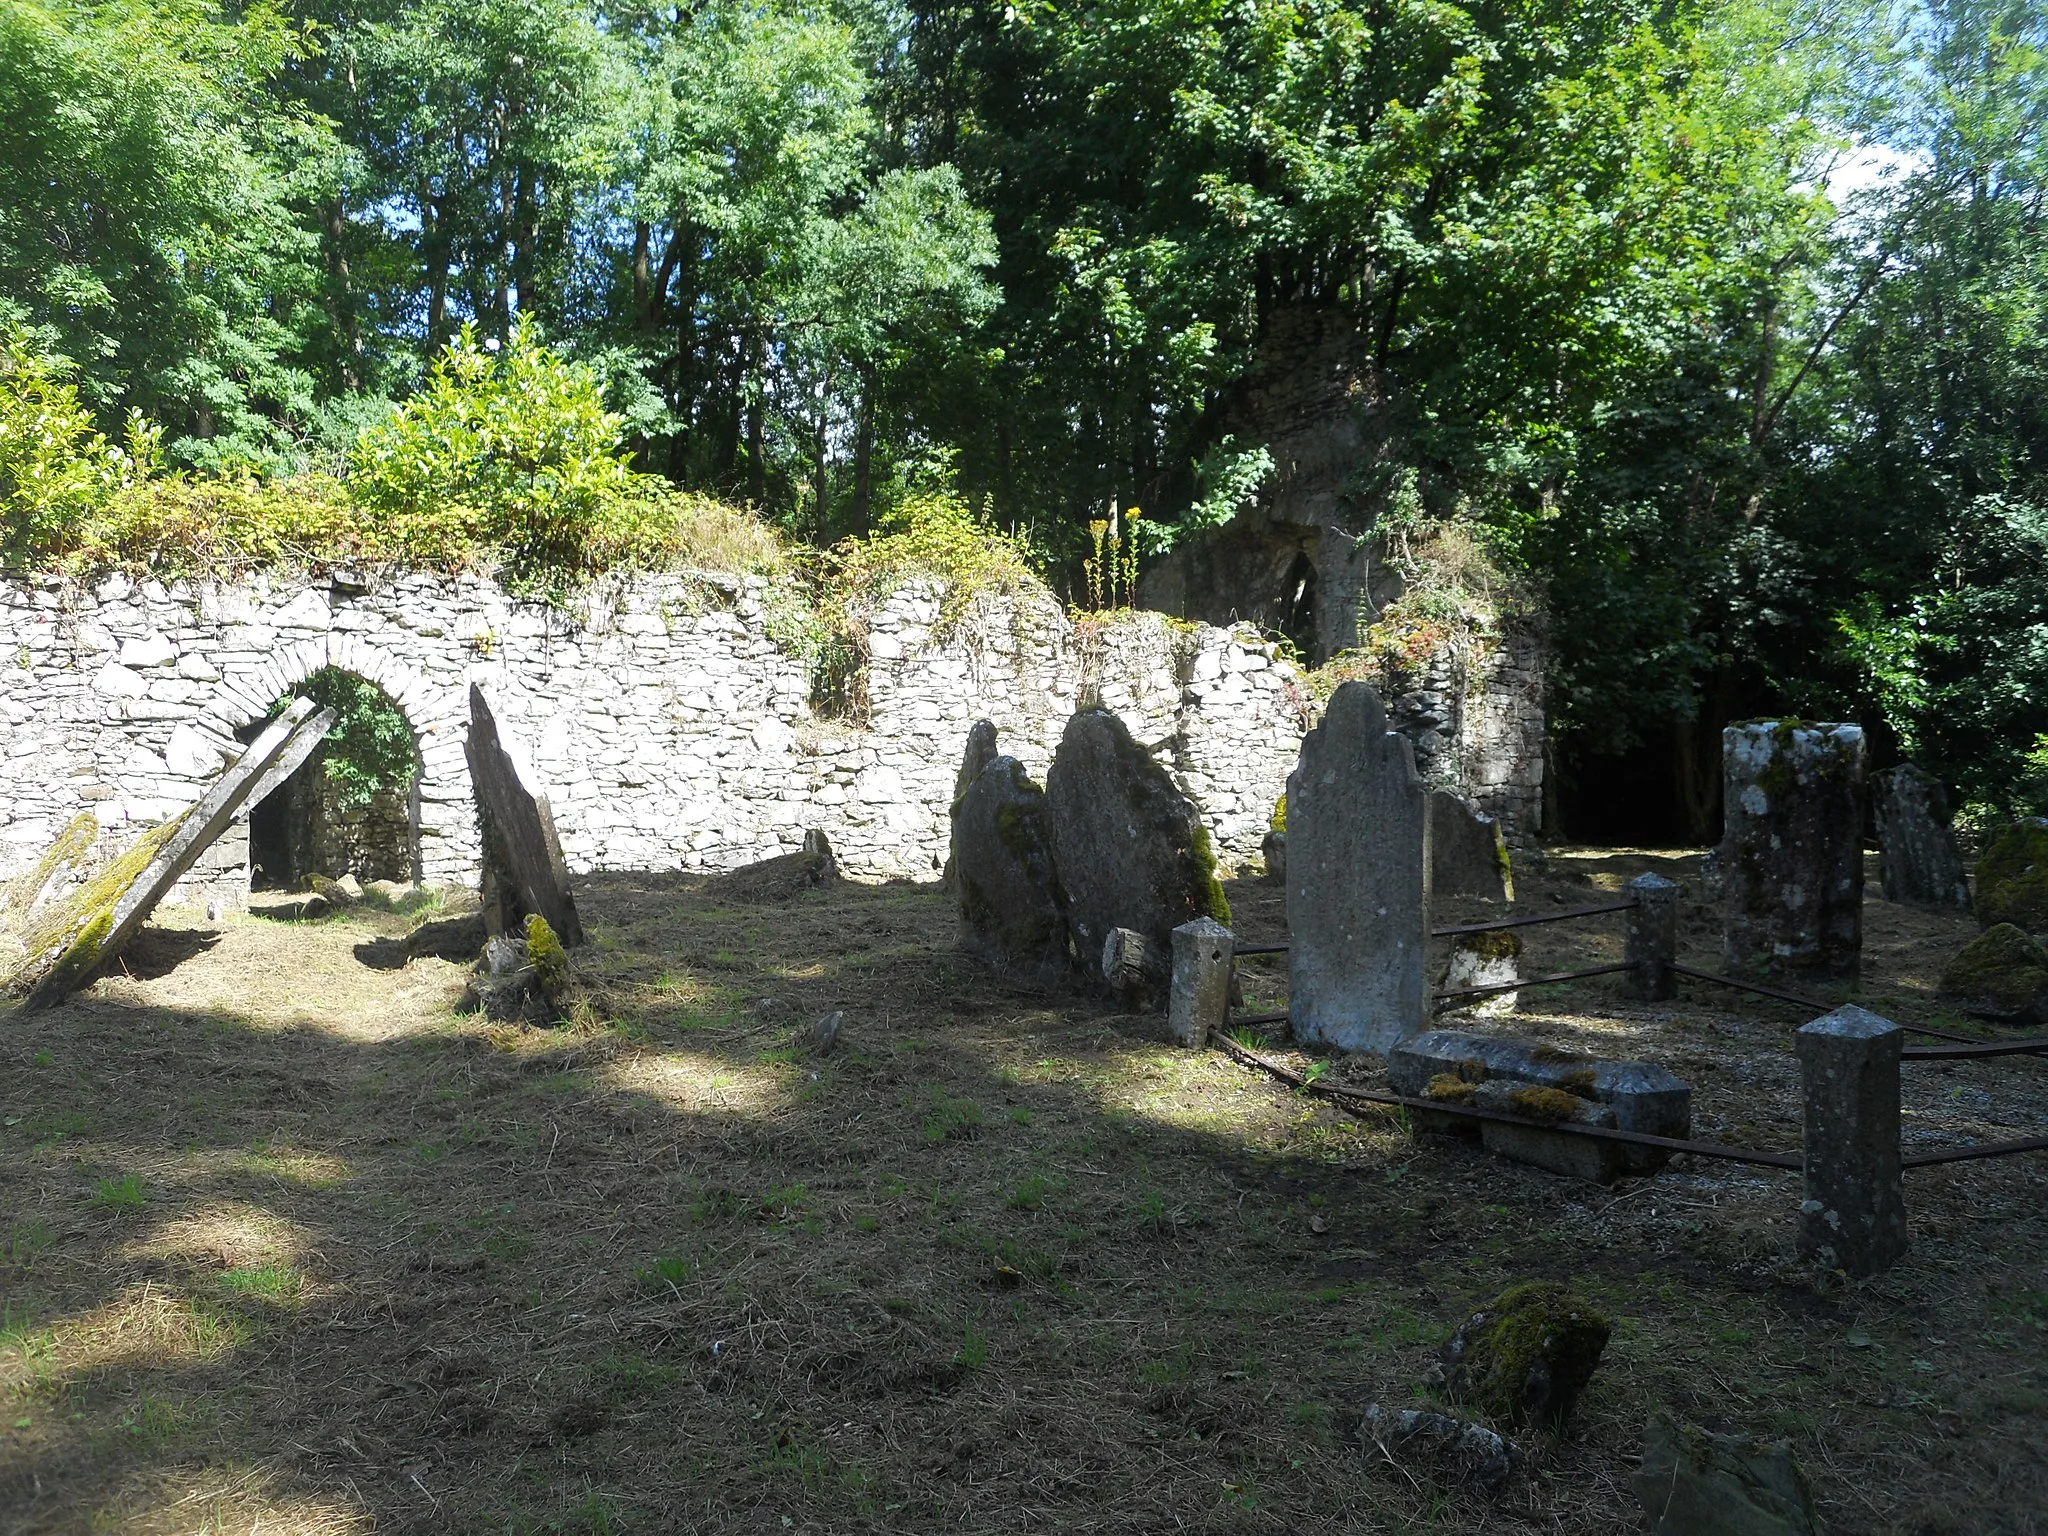 Photo showing: The ruins of Ballyoughtera Church (built 1549, destroyed 1641) on the grounds of Castlemartyr House, Imokilly, Cork, Ireland.